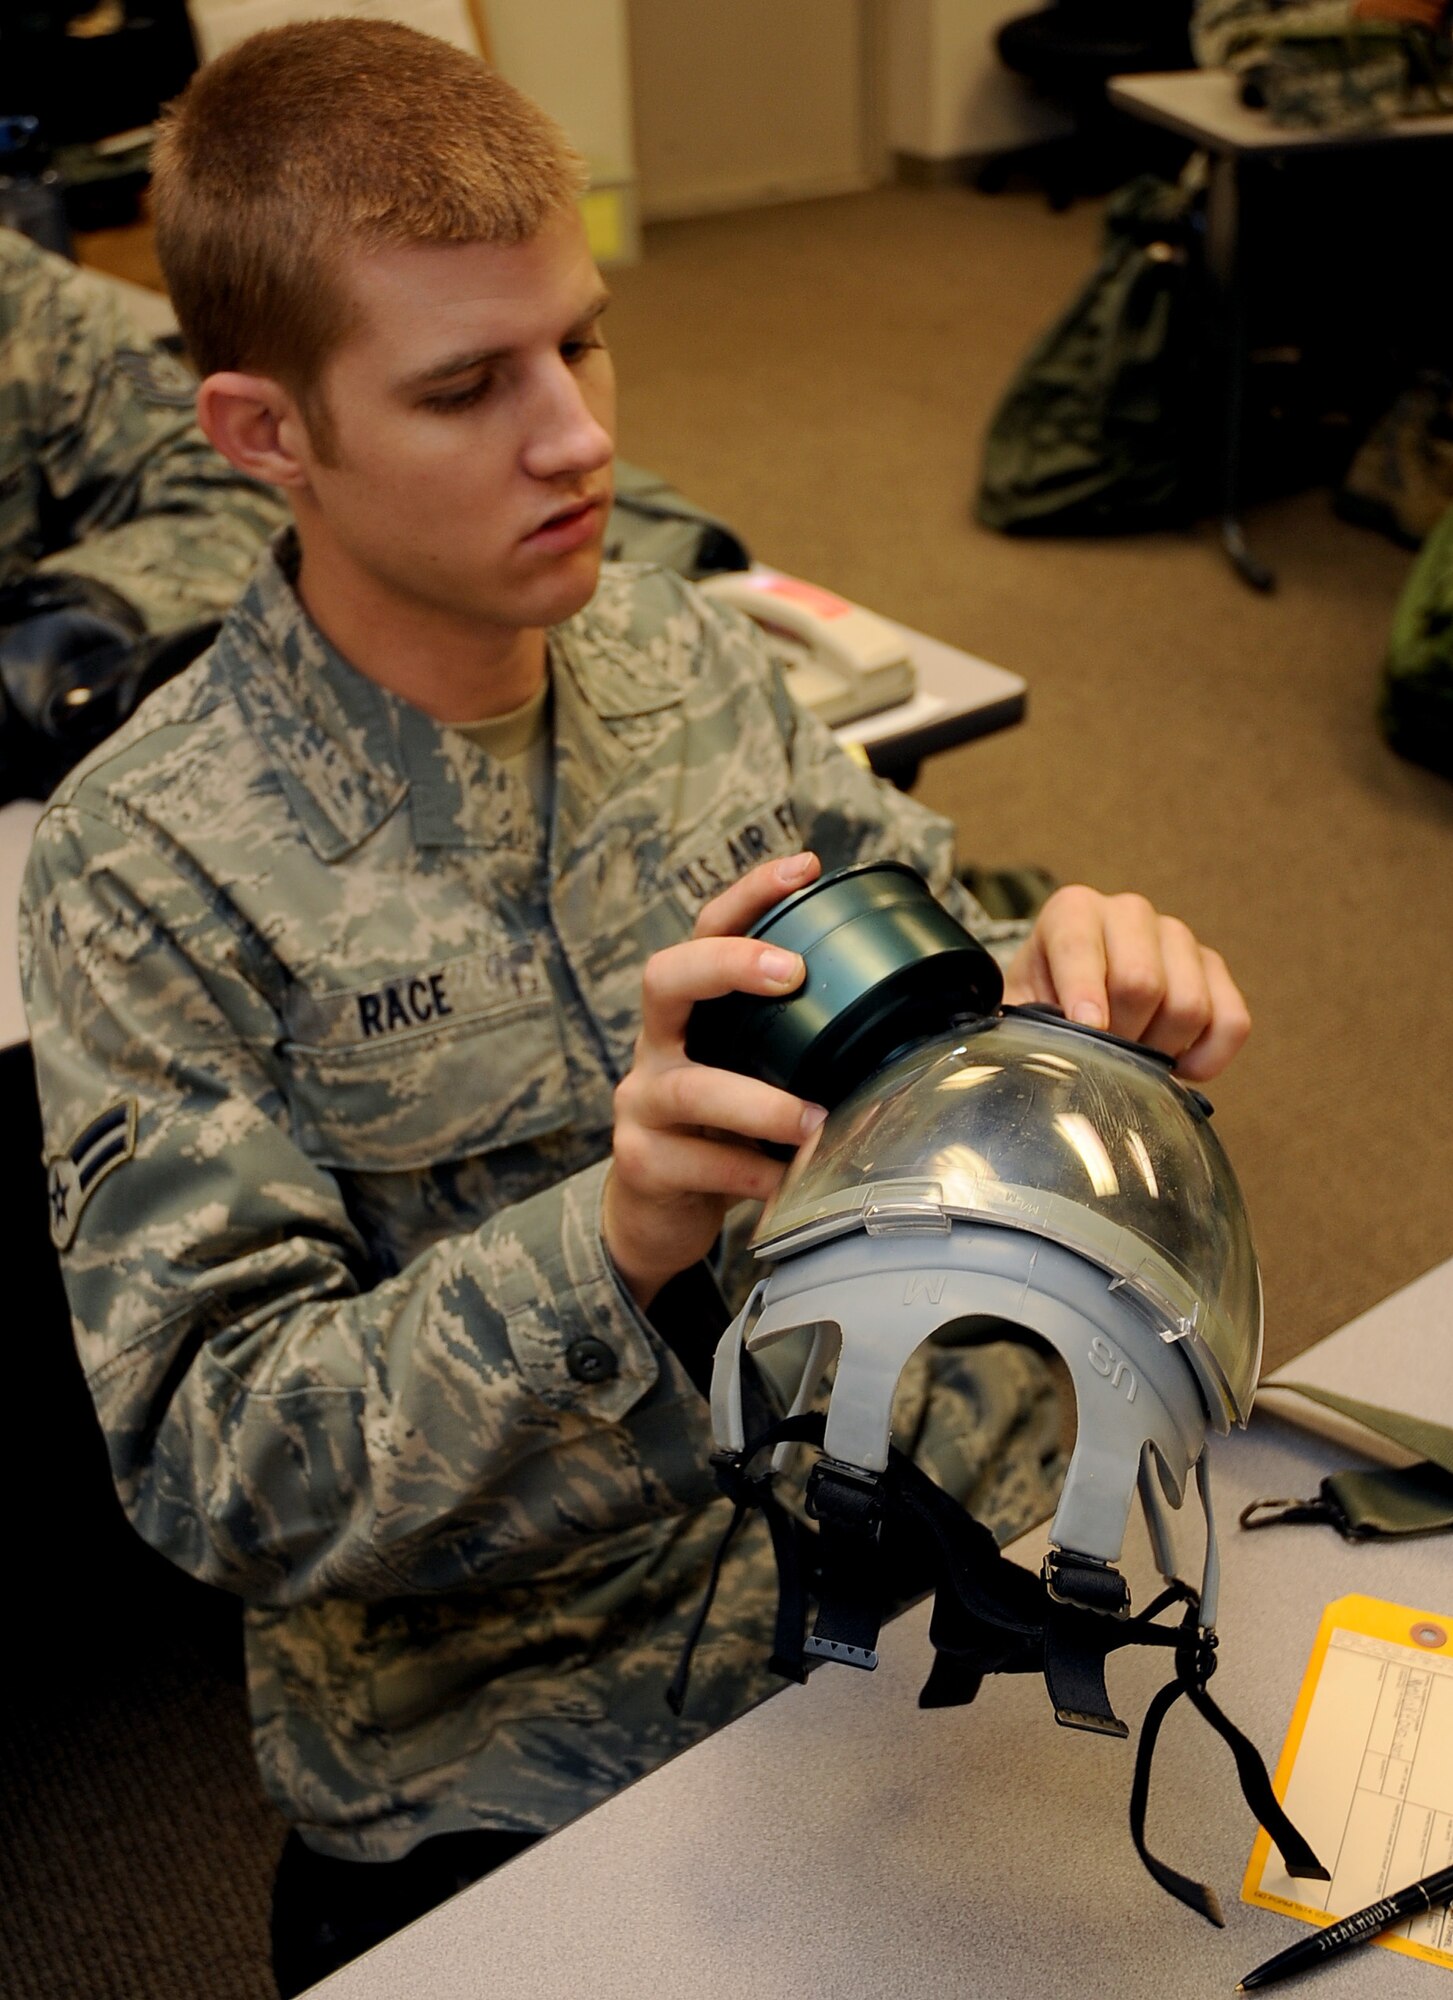 Airman 1st Class Nick Race, 8th Air Force, inspects his gas mask during a chemical, biological, radiological, nuclear and high-yield explosive class on Barksdale Air Force Base, La., Aug. 18. The 2nd Civil Engineer Squadron Emergency Management flight teaches the CBRNE class several times a month to keep Barksdale Airmen up to date with their training requirements. (U.S. Air Force photo/Senior Airman Amber Ashcraft) (RELEASED)